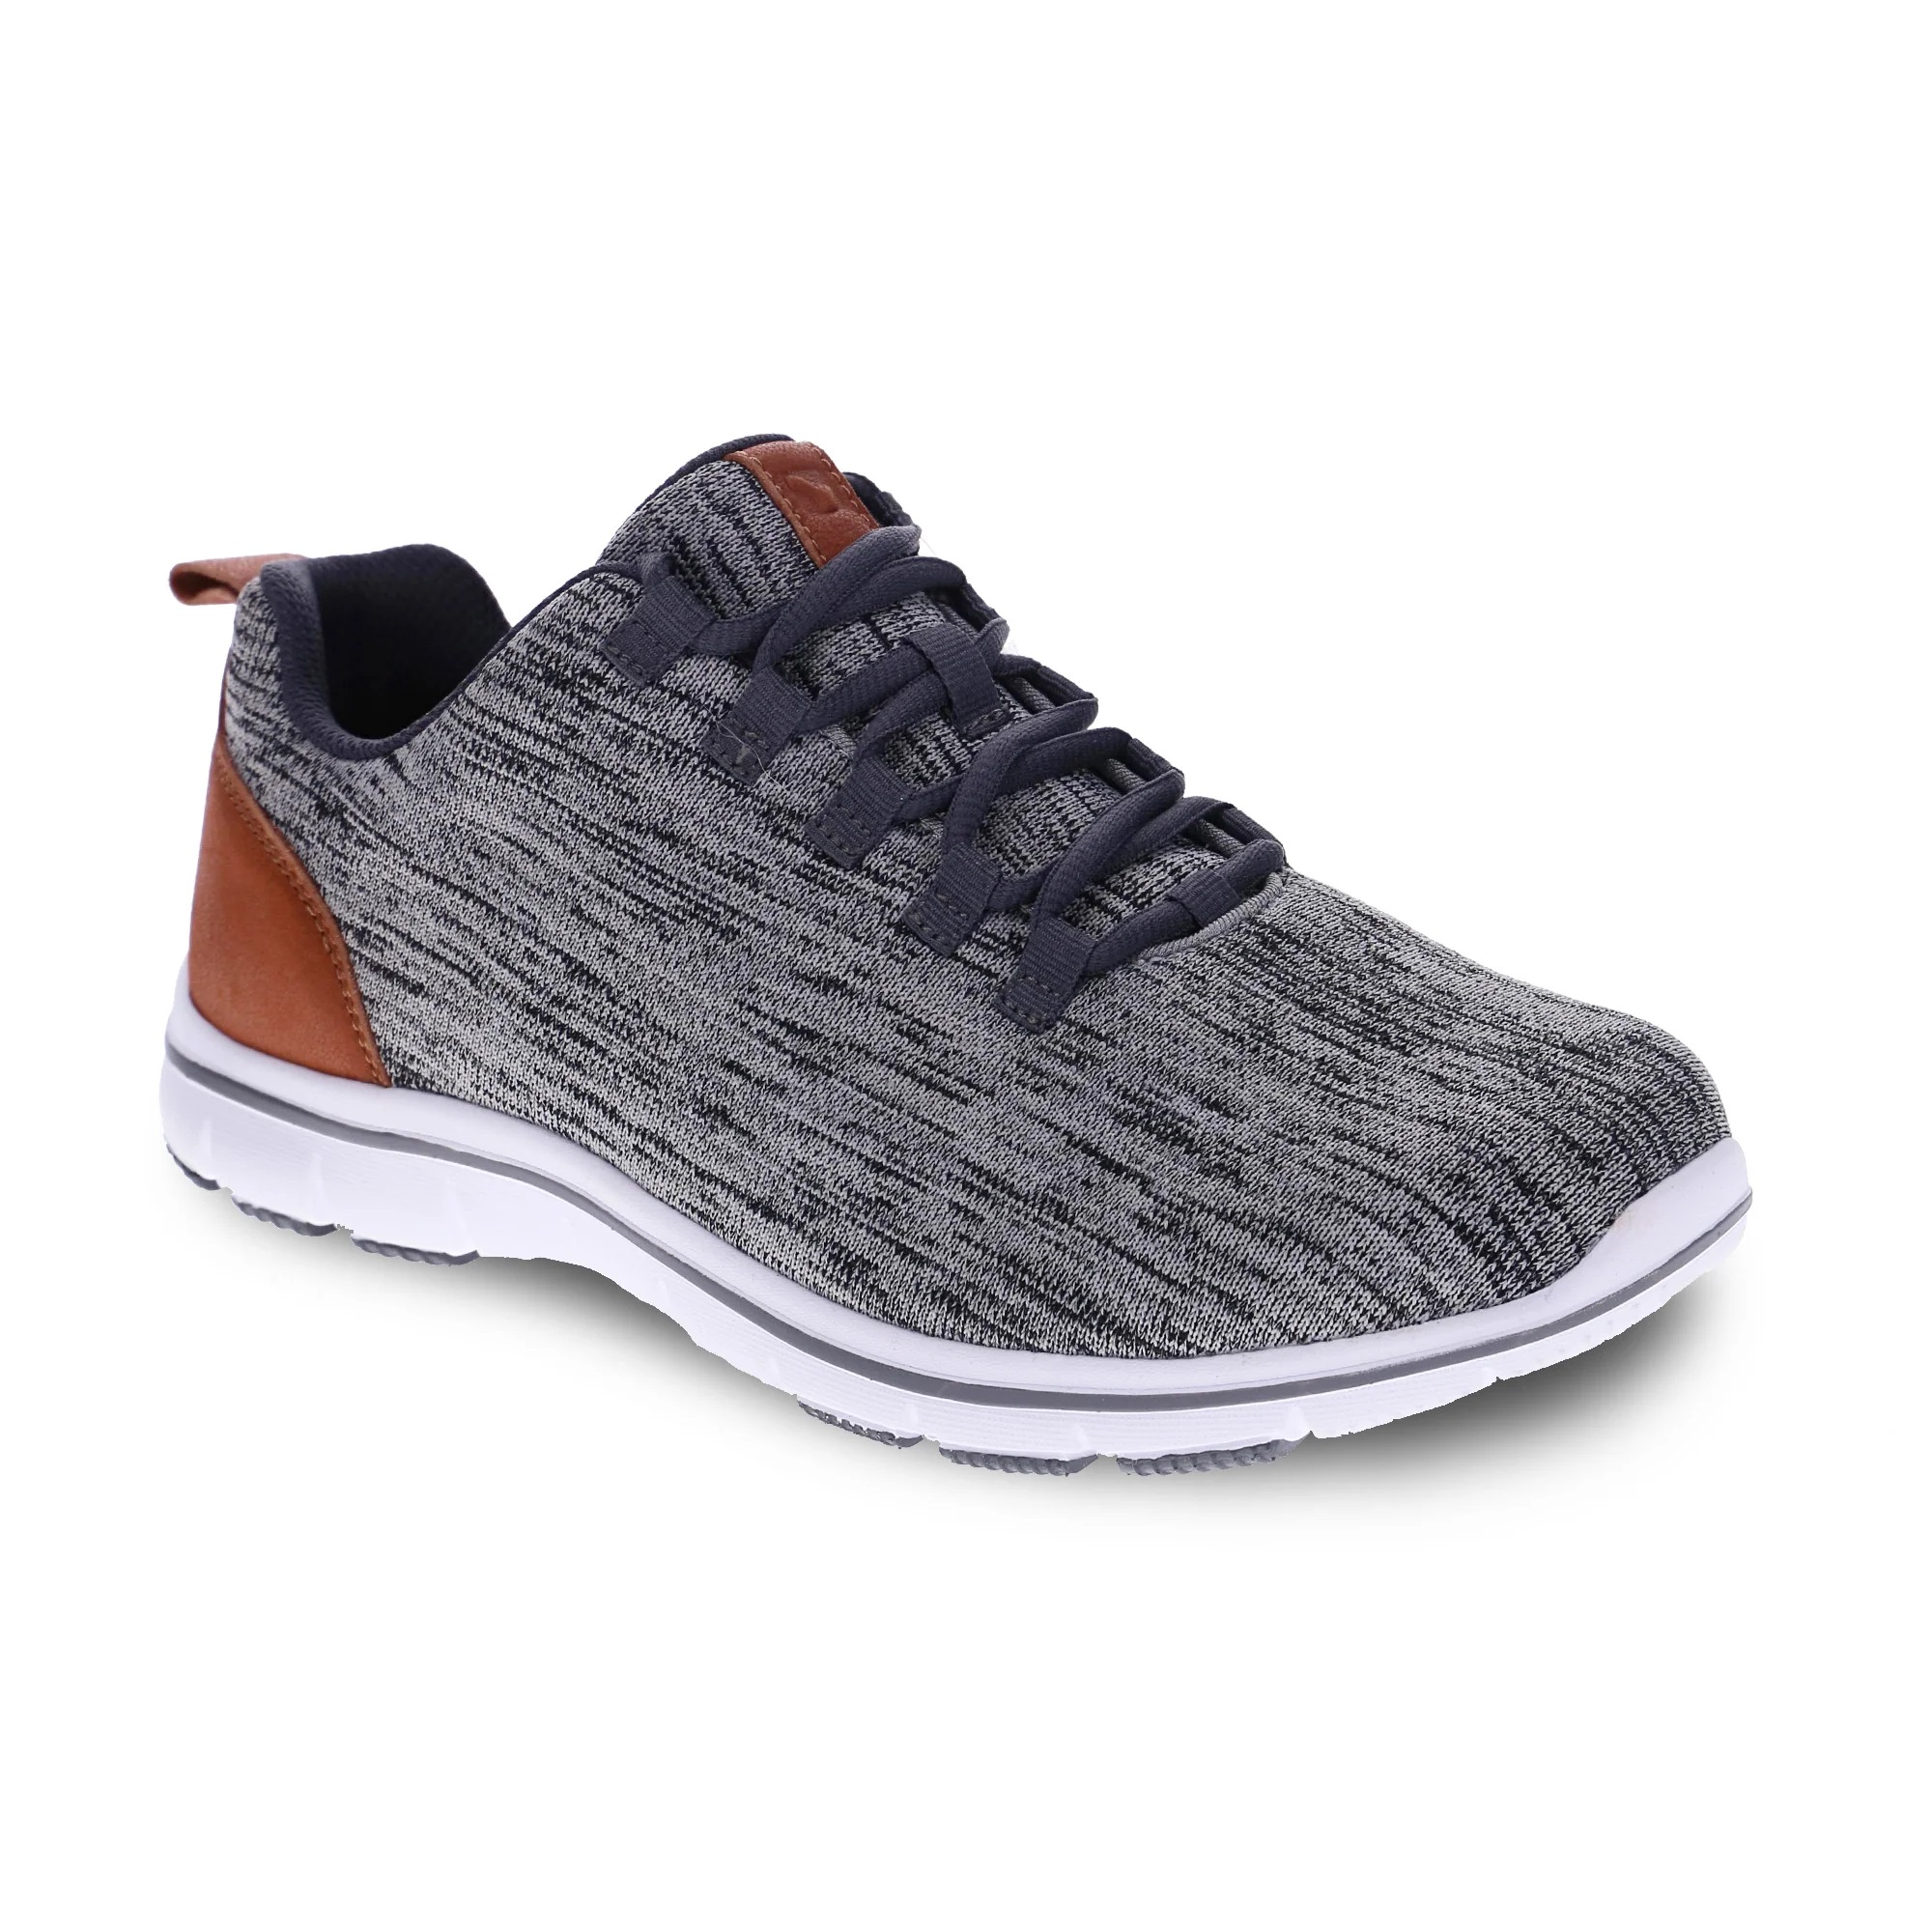 Revere Hudson Men's Athletic Shoe - Extra Depth With Removable Footbeds - Wide